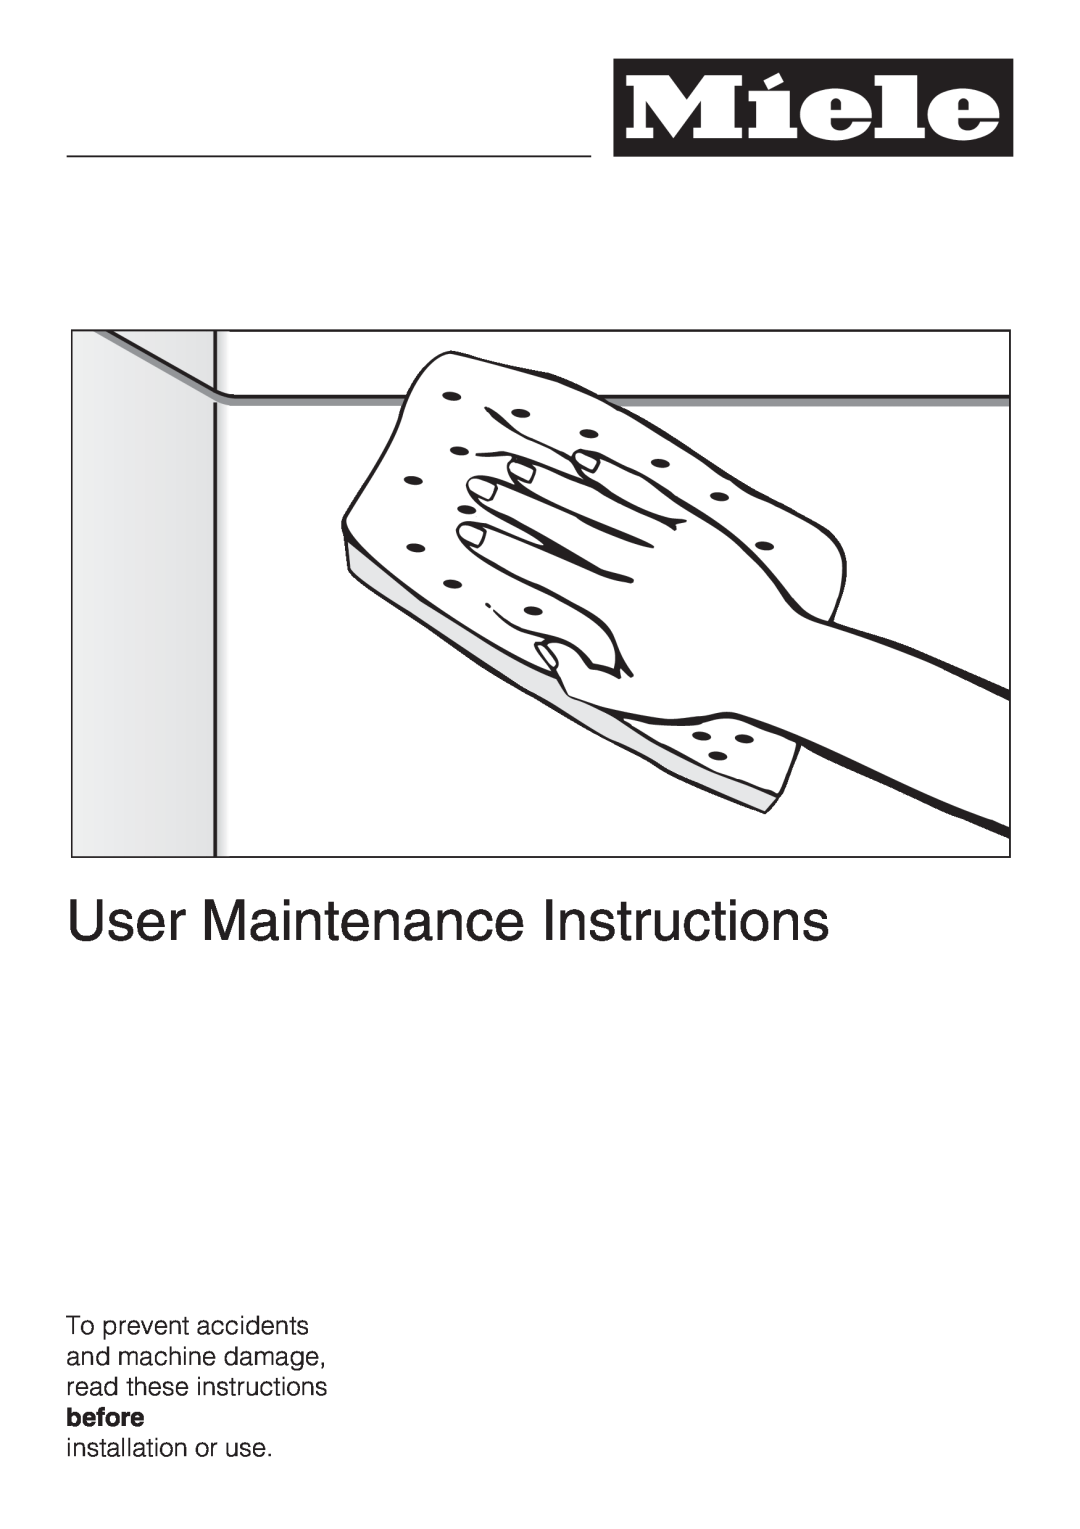 Miele G4281, G4286 manual User Maintenance Instructions, installation or use 